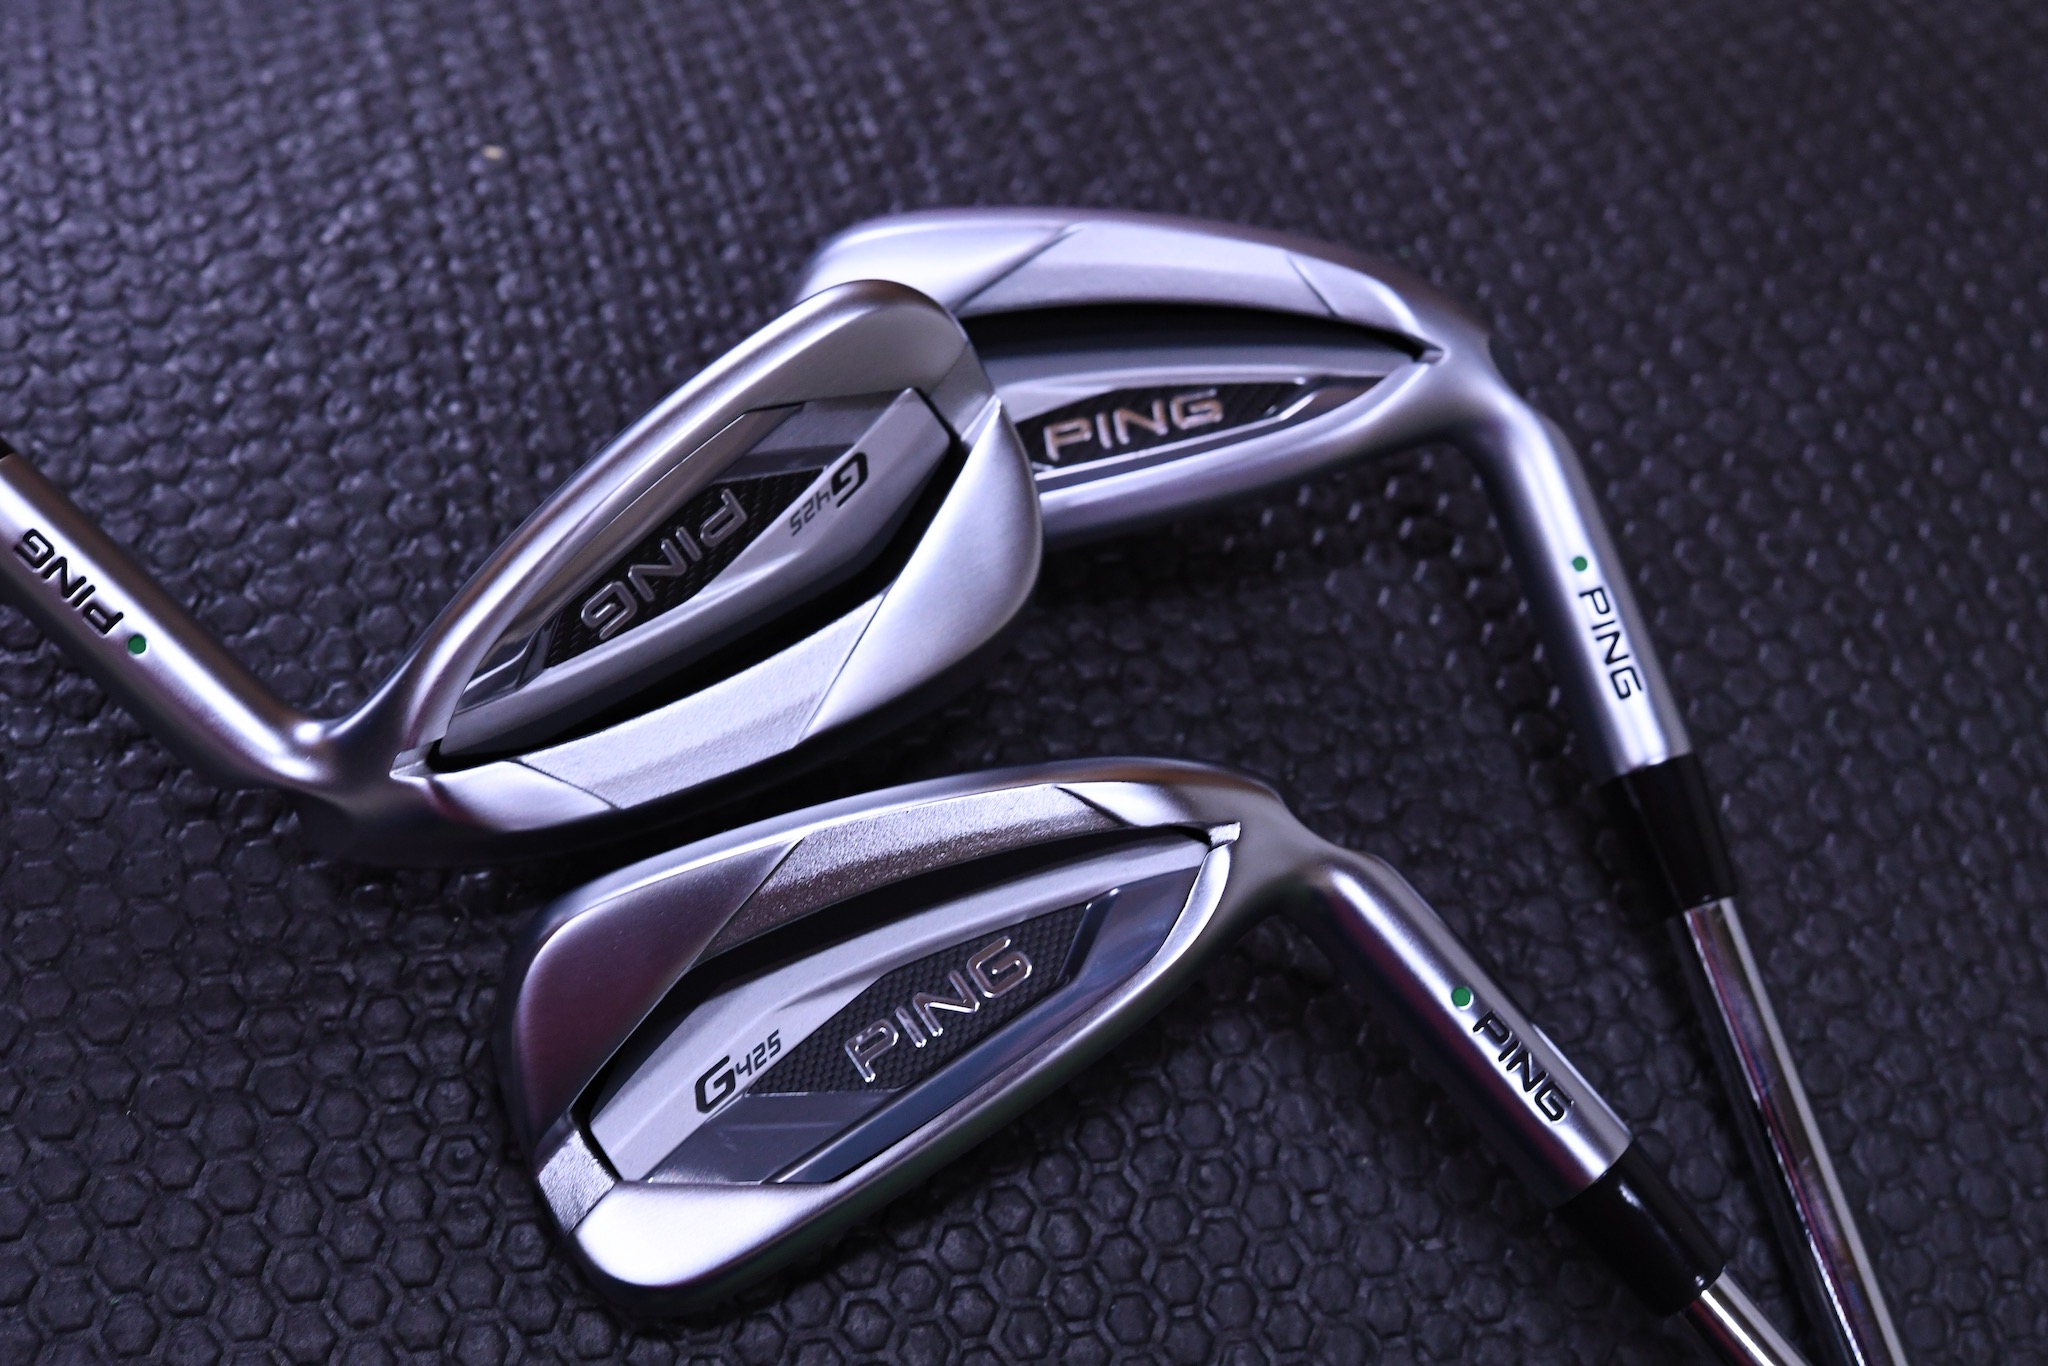 Ping G425 irons: Smaller and faster for 2021 – GolfWRX